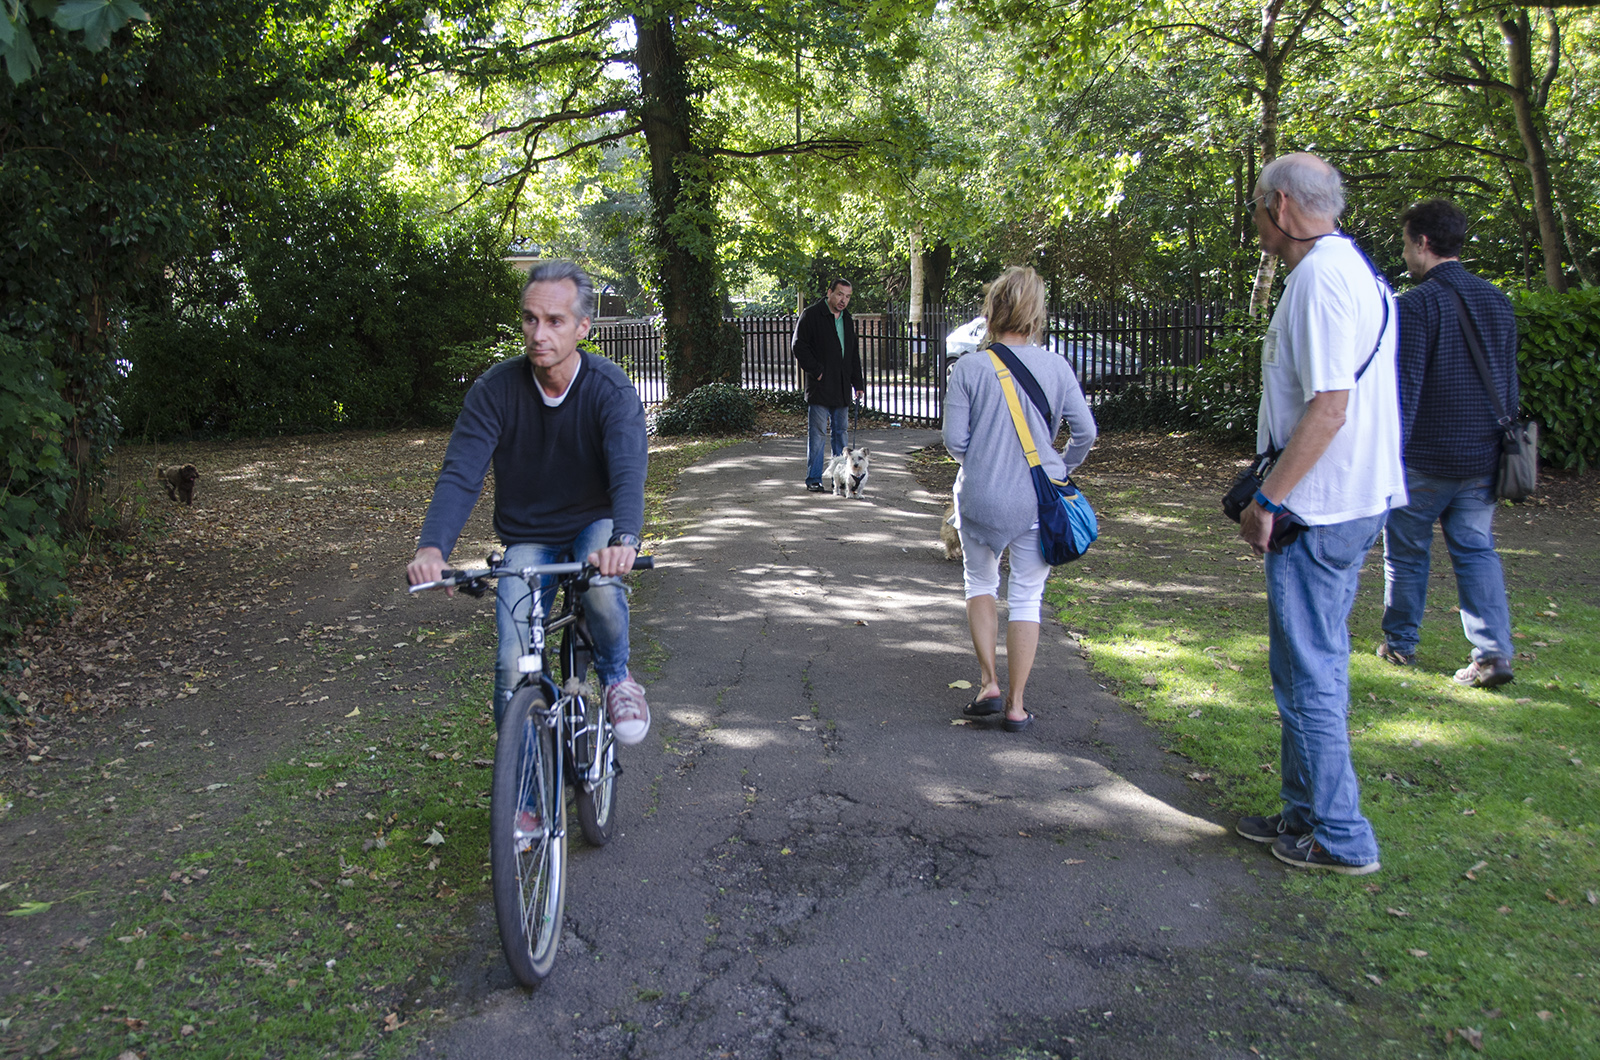 2016-09-28-Barnet_Dollis-Valley-Greenwalk_Autumn_People-Dogs-Photographers-and-a-Bicycle